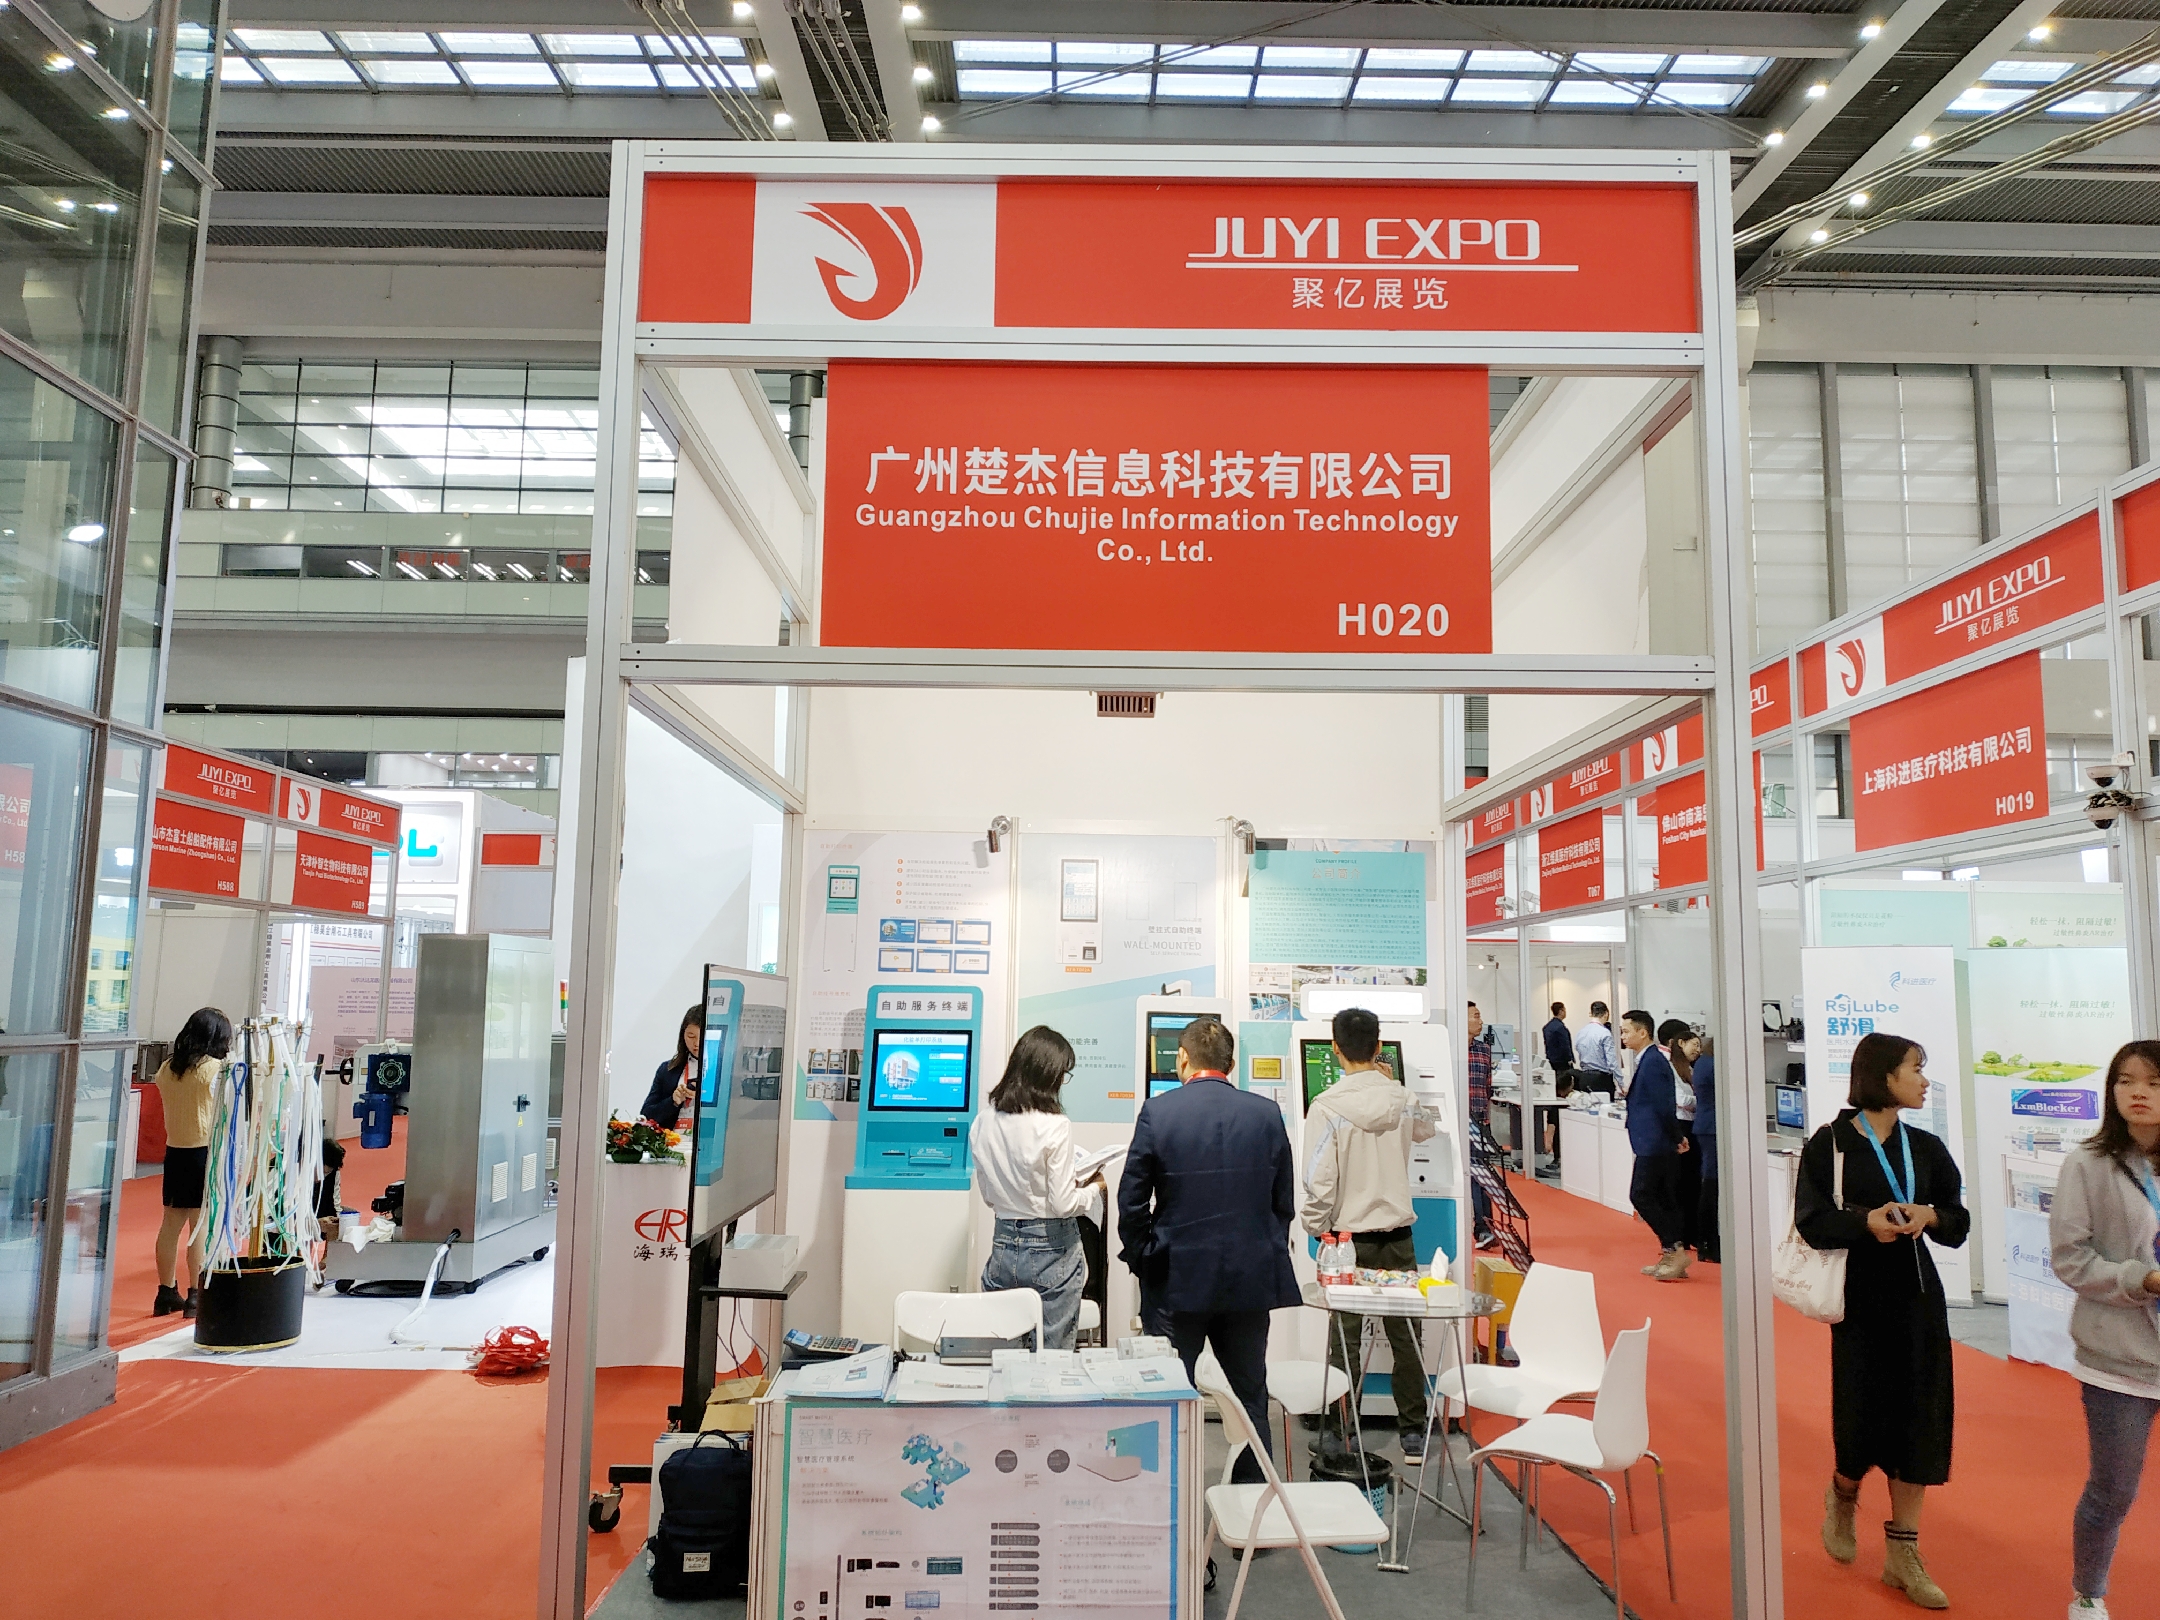 The 27th Shenzhen International Medical Equipment Exhibition in 2019 Concluded With Perfect Ending.